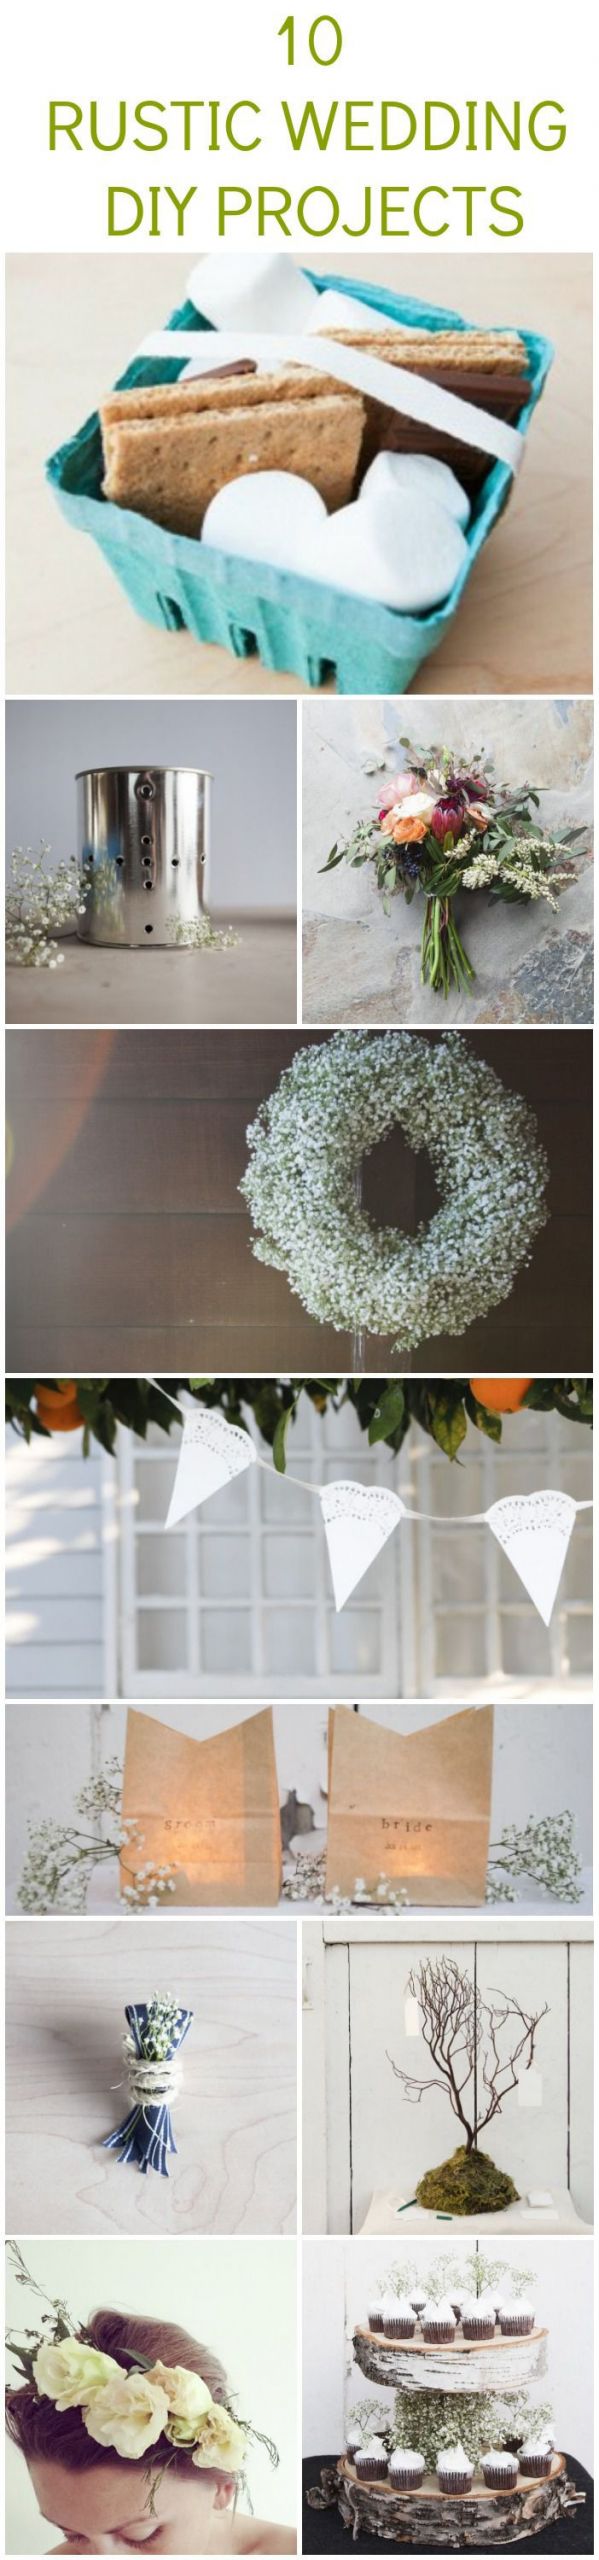 DIY Country Wedding
 10 Rustic Wedding DIY Projects You Should Try Rustic